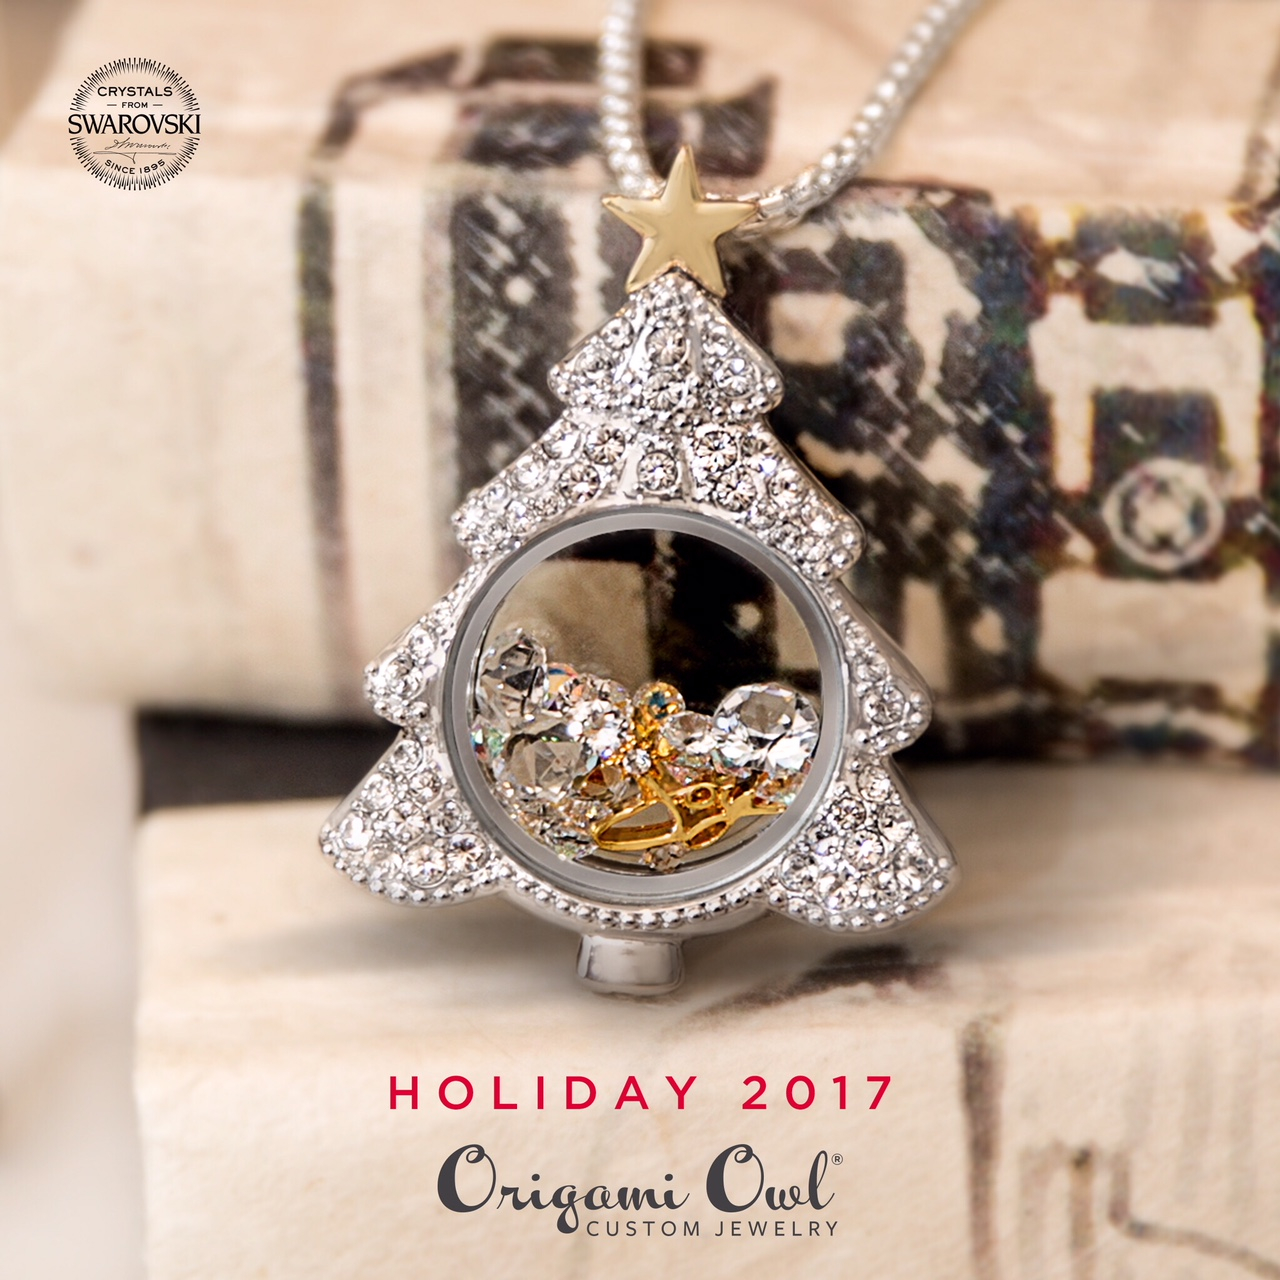 Origami Owl Christmas Charms Origami Owl Holiday Collection 2017 Give The Gift Of Sparkle